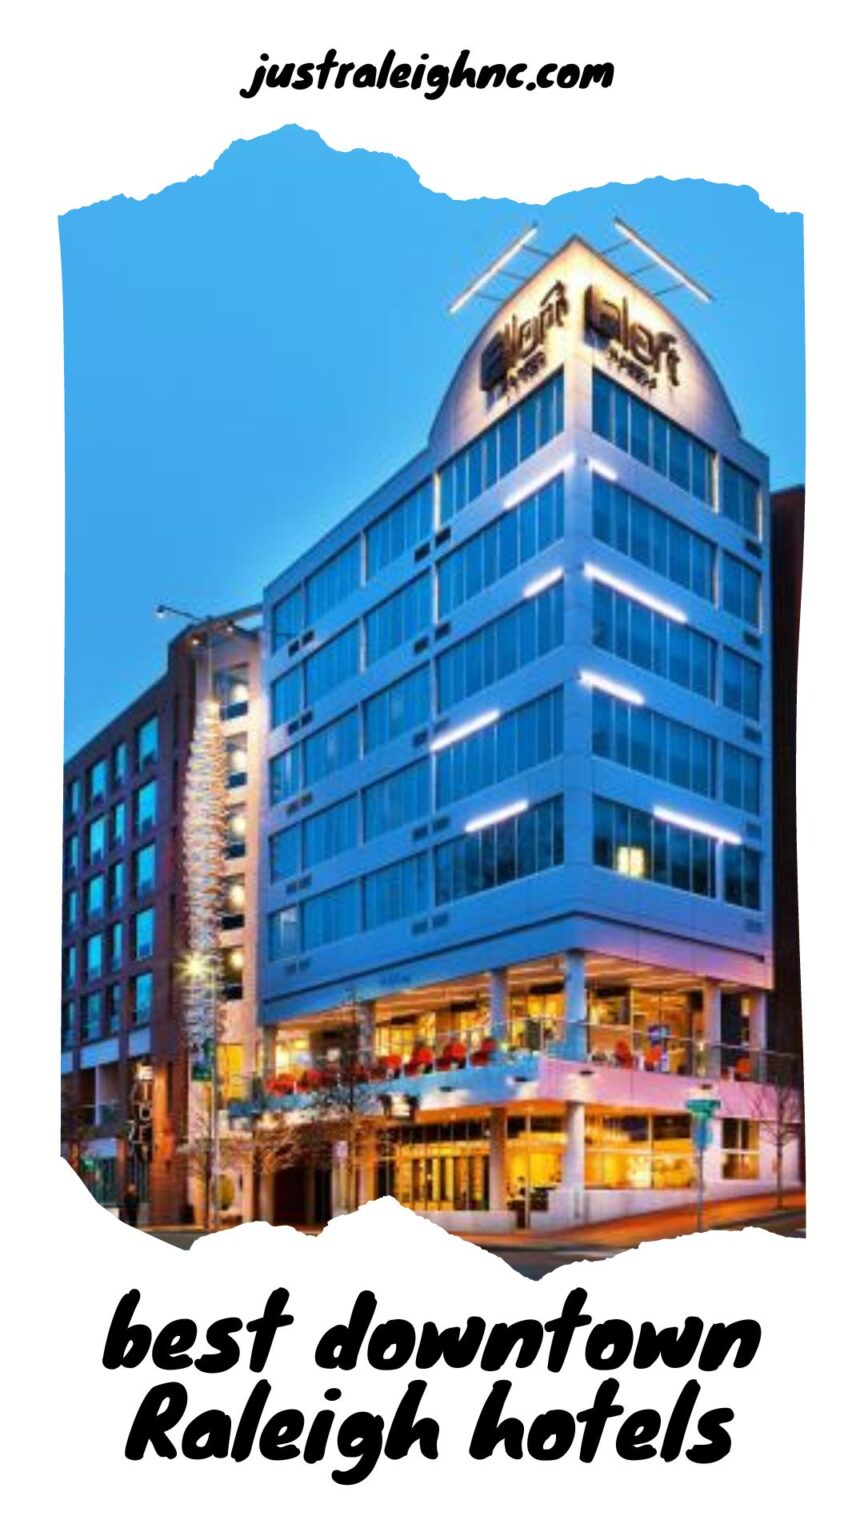 Discover The Best Downtown Raleigh Hotels For An Unforgettable Stay Just Raleigh Nc 7530